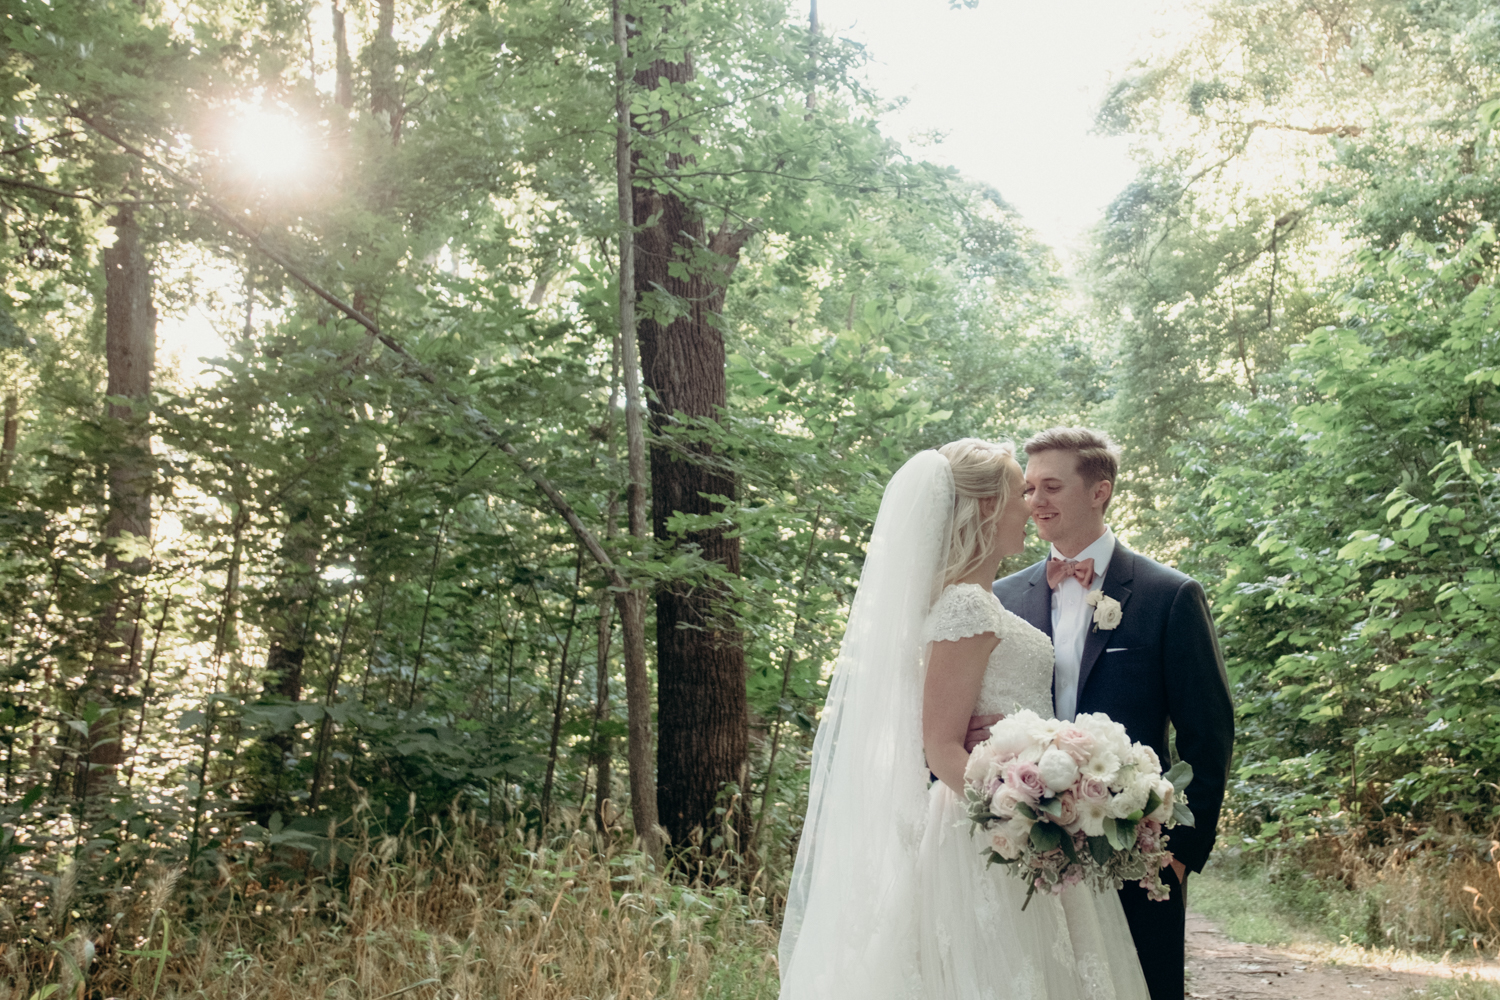 A husband and wife smile at one another in the woods after their outdoor wedding ceremony at Lansdowne Resort.